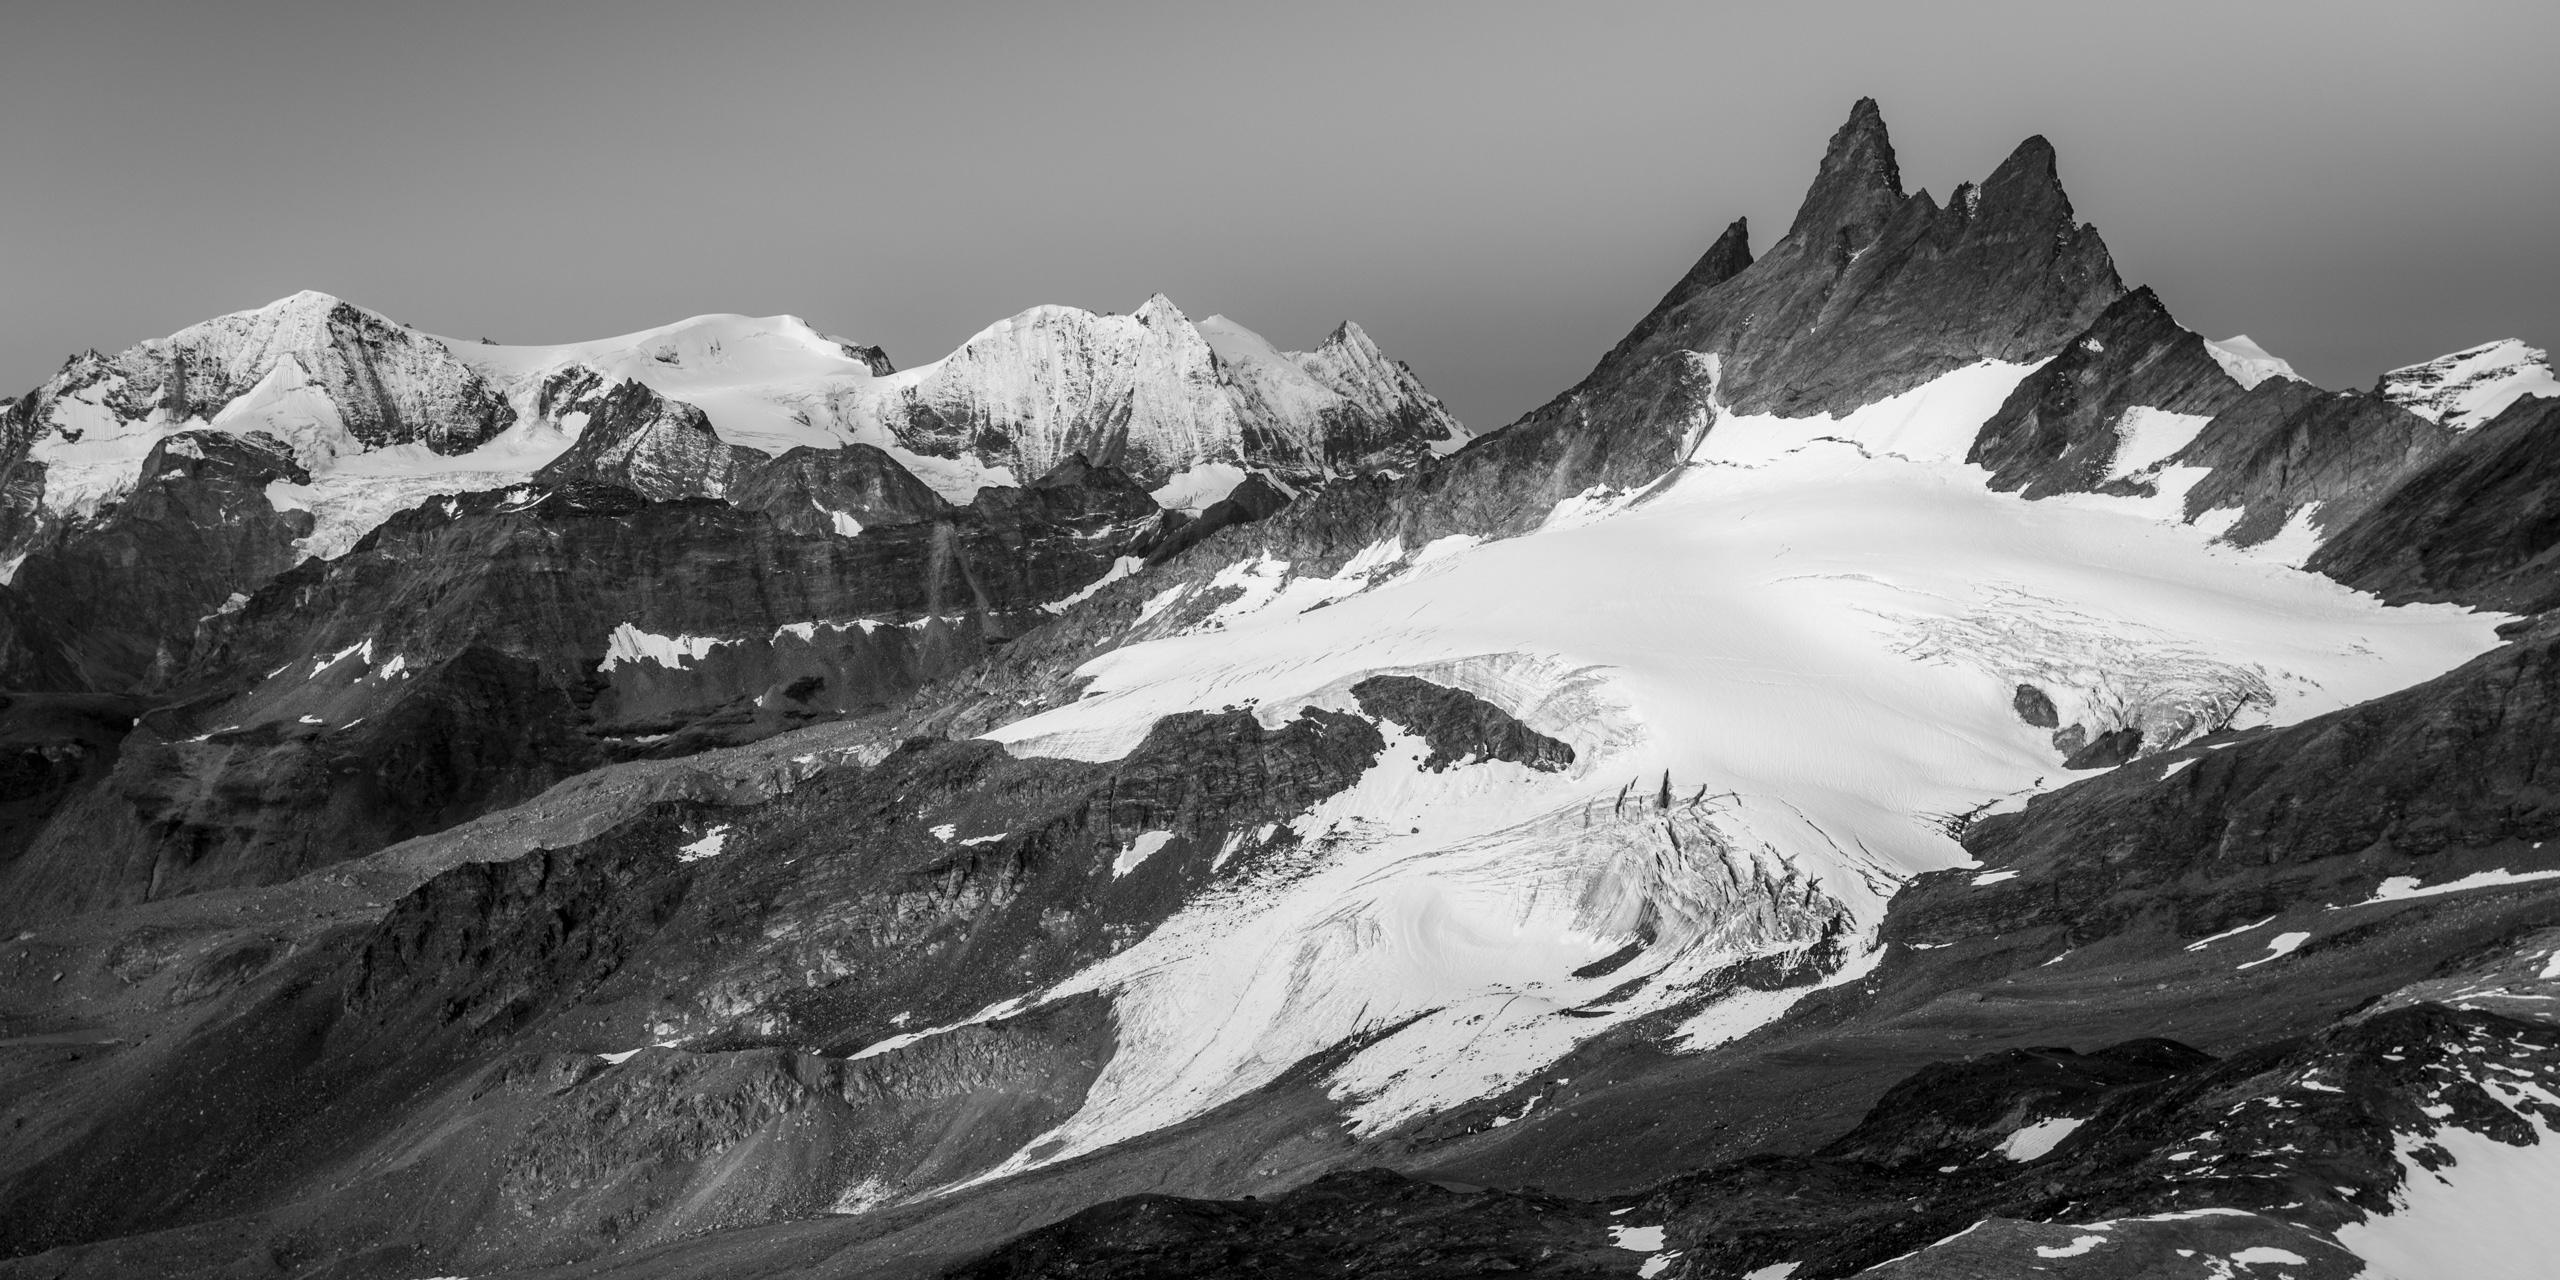 Panoramic view of the snow-capped mountain peaks of Arolla Aiguilles Rouges - Mont Blanc de Cheillon and La Ruinette